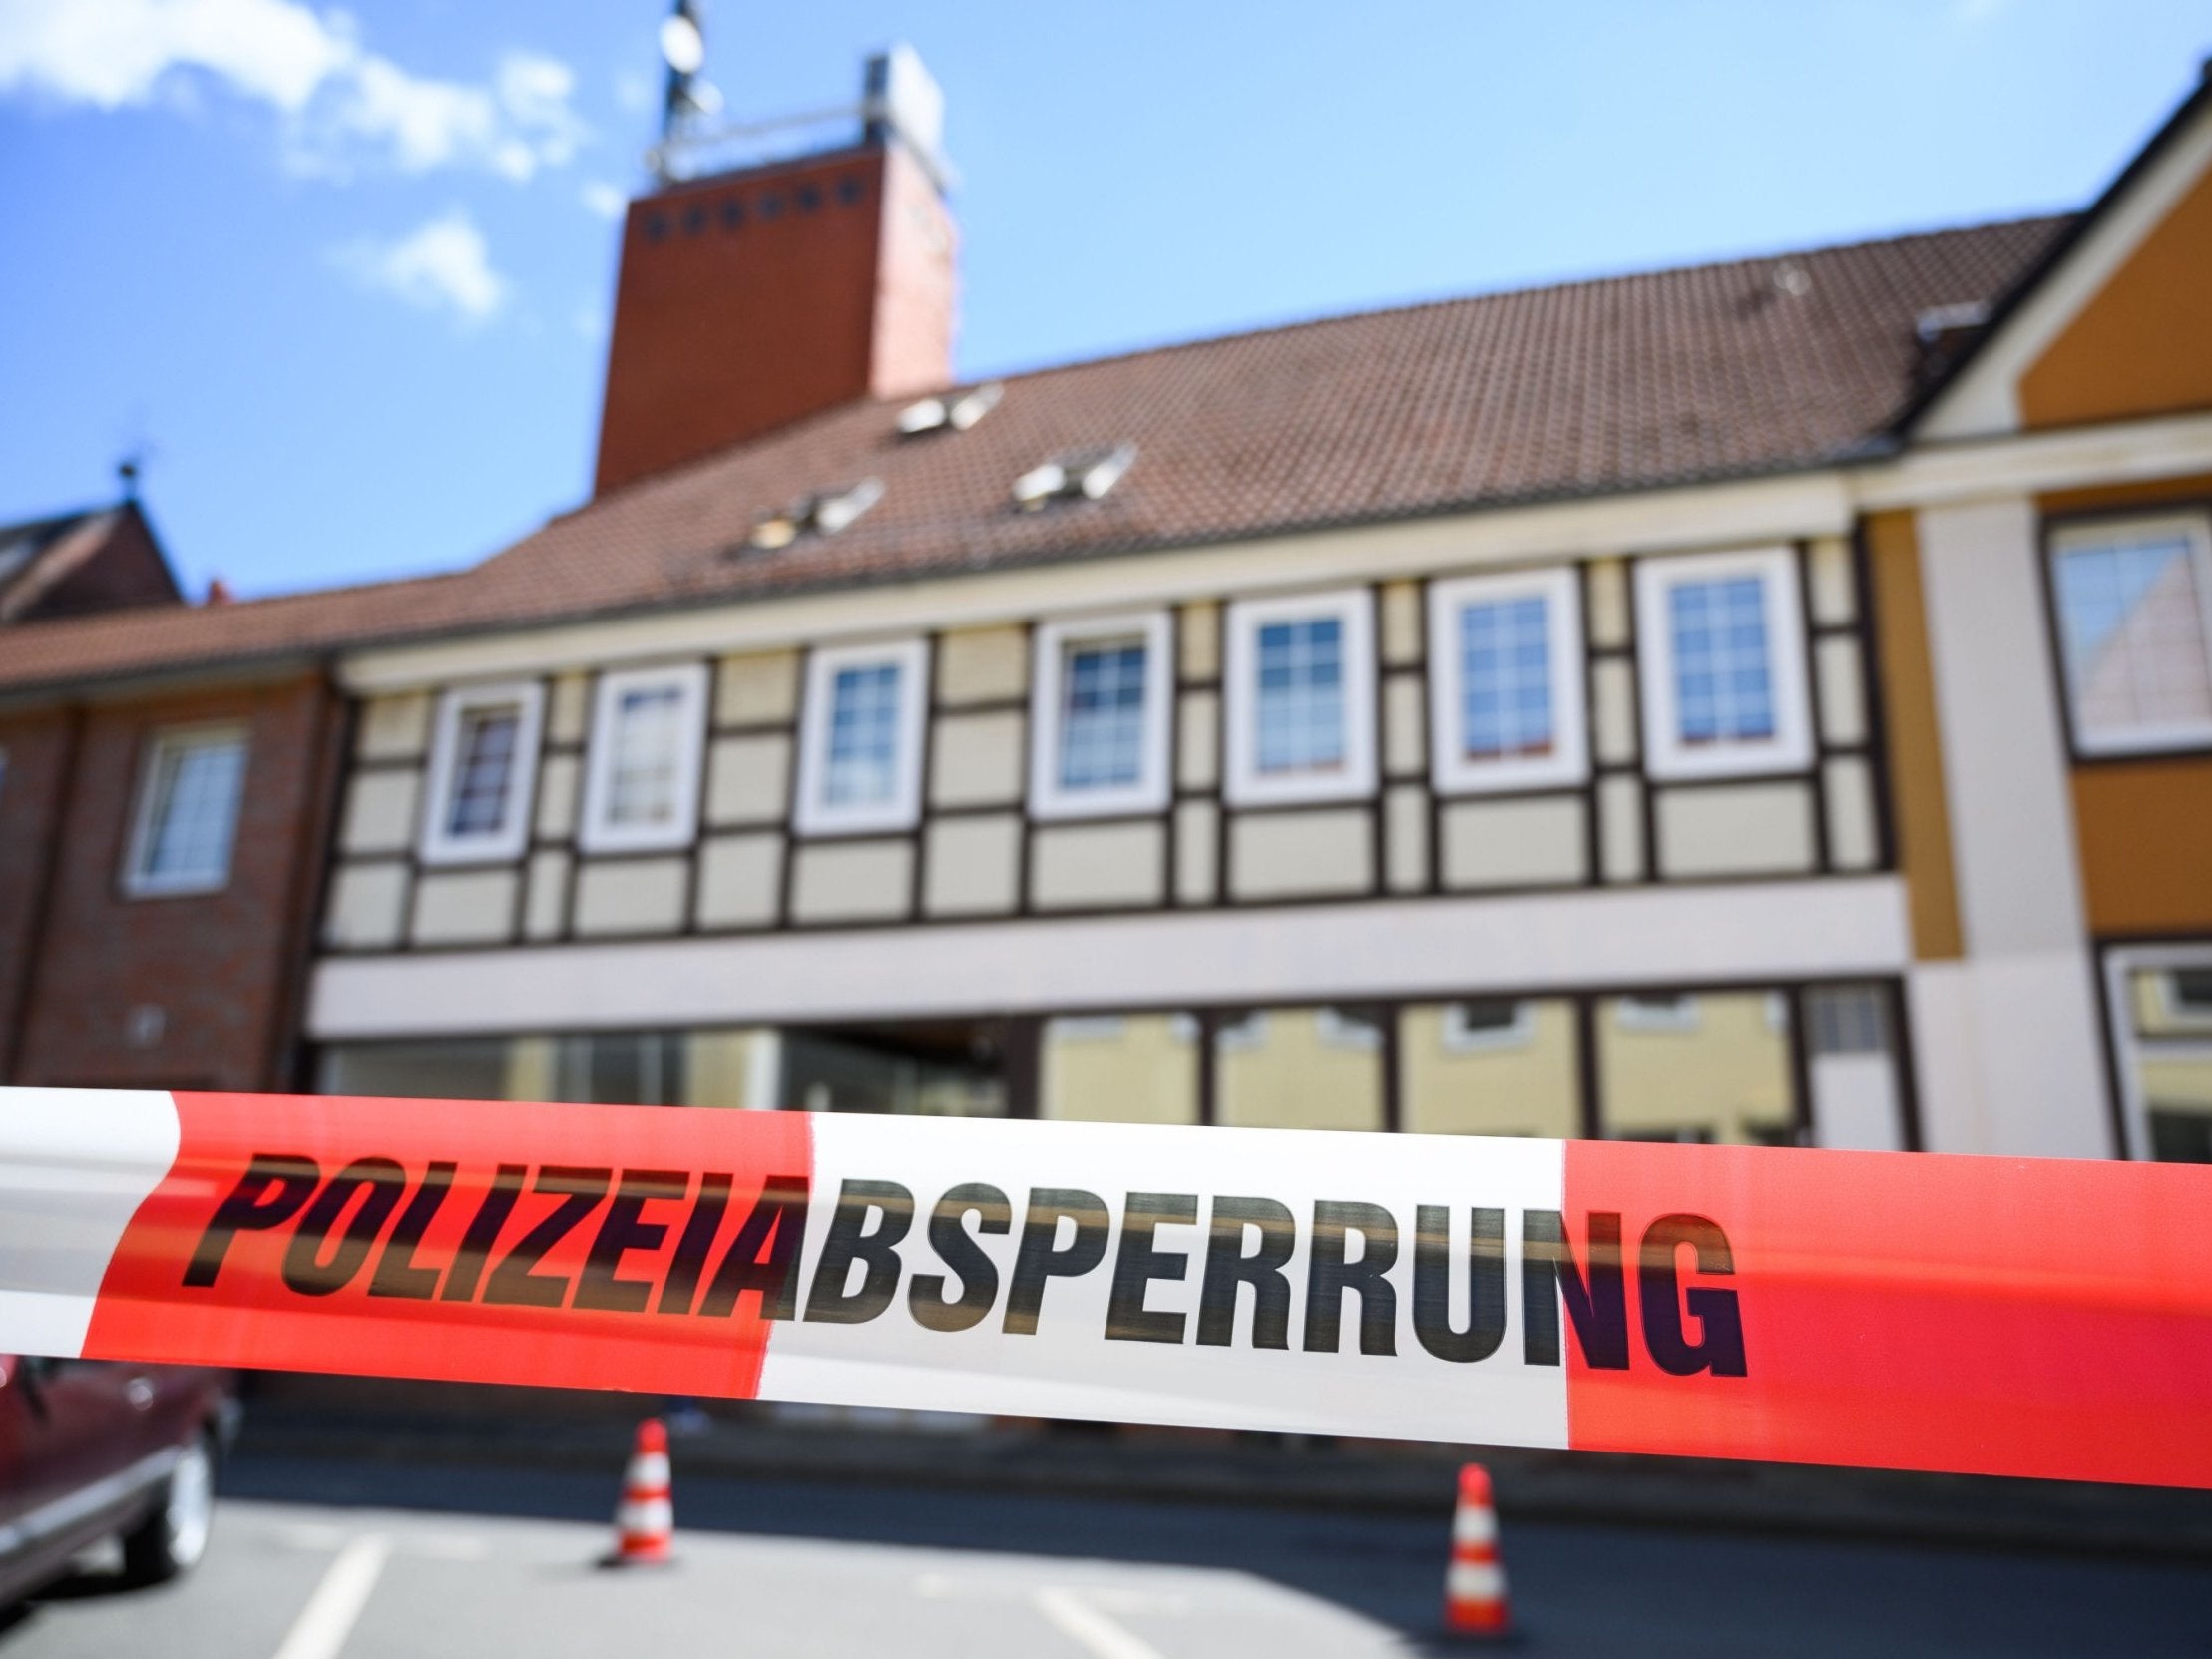 A house in Wittingen, northern Germany, is cordoned off by police after the discovery of two more bodies